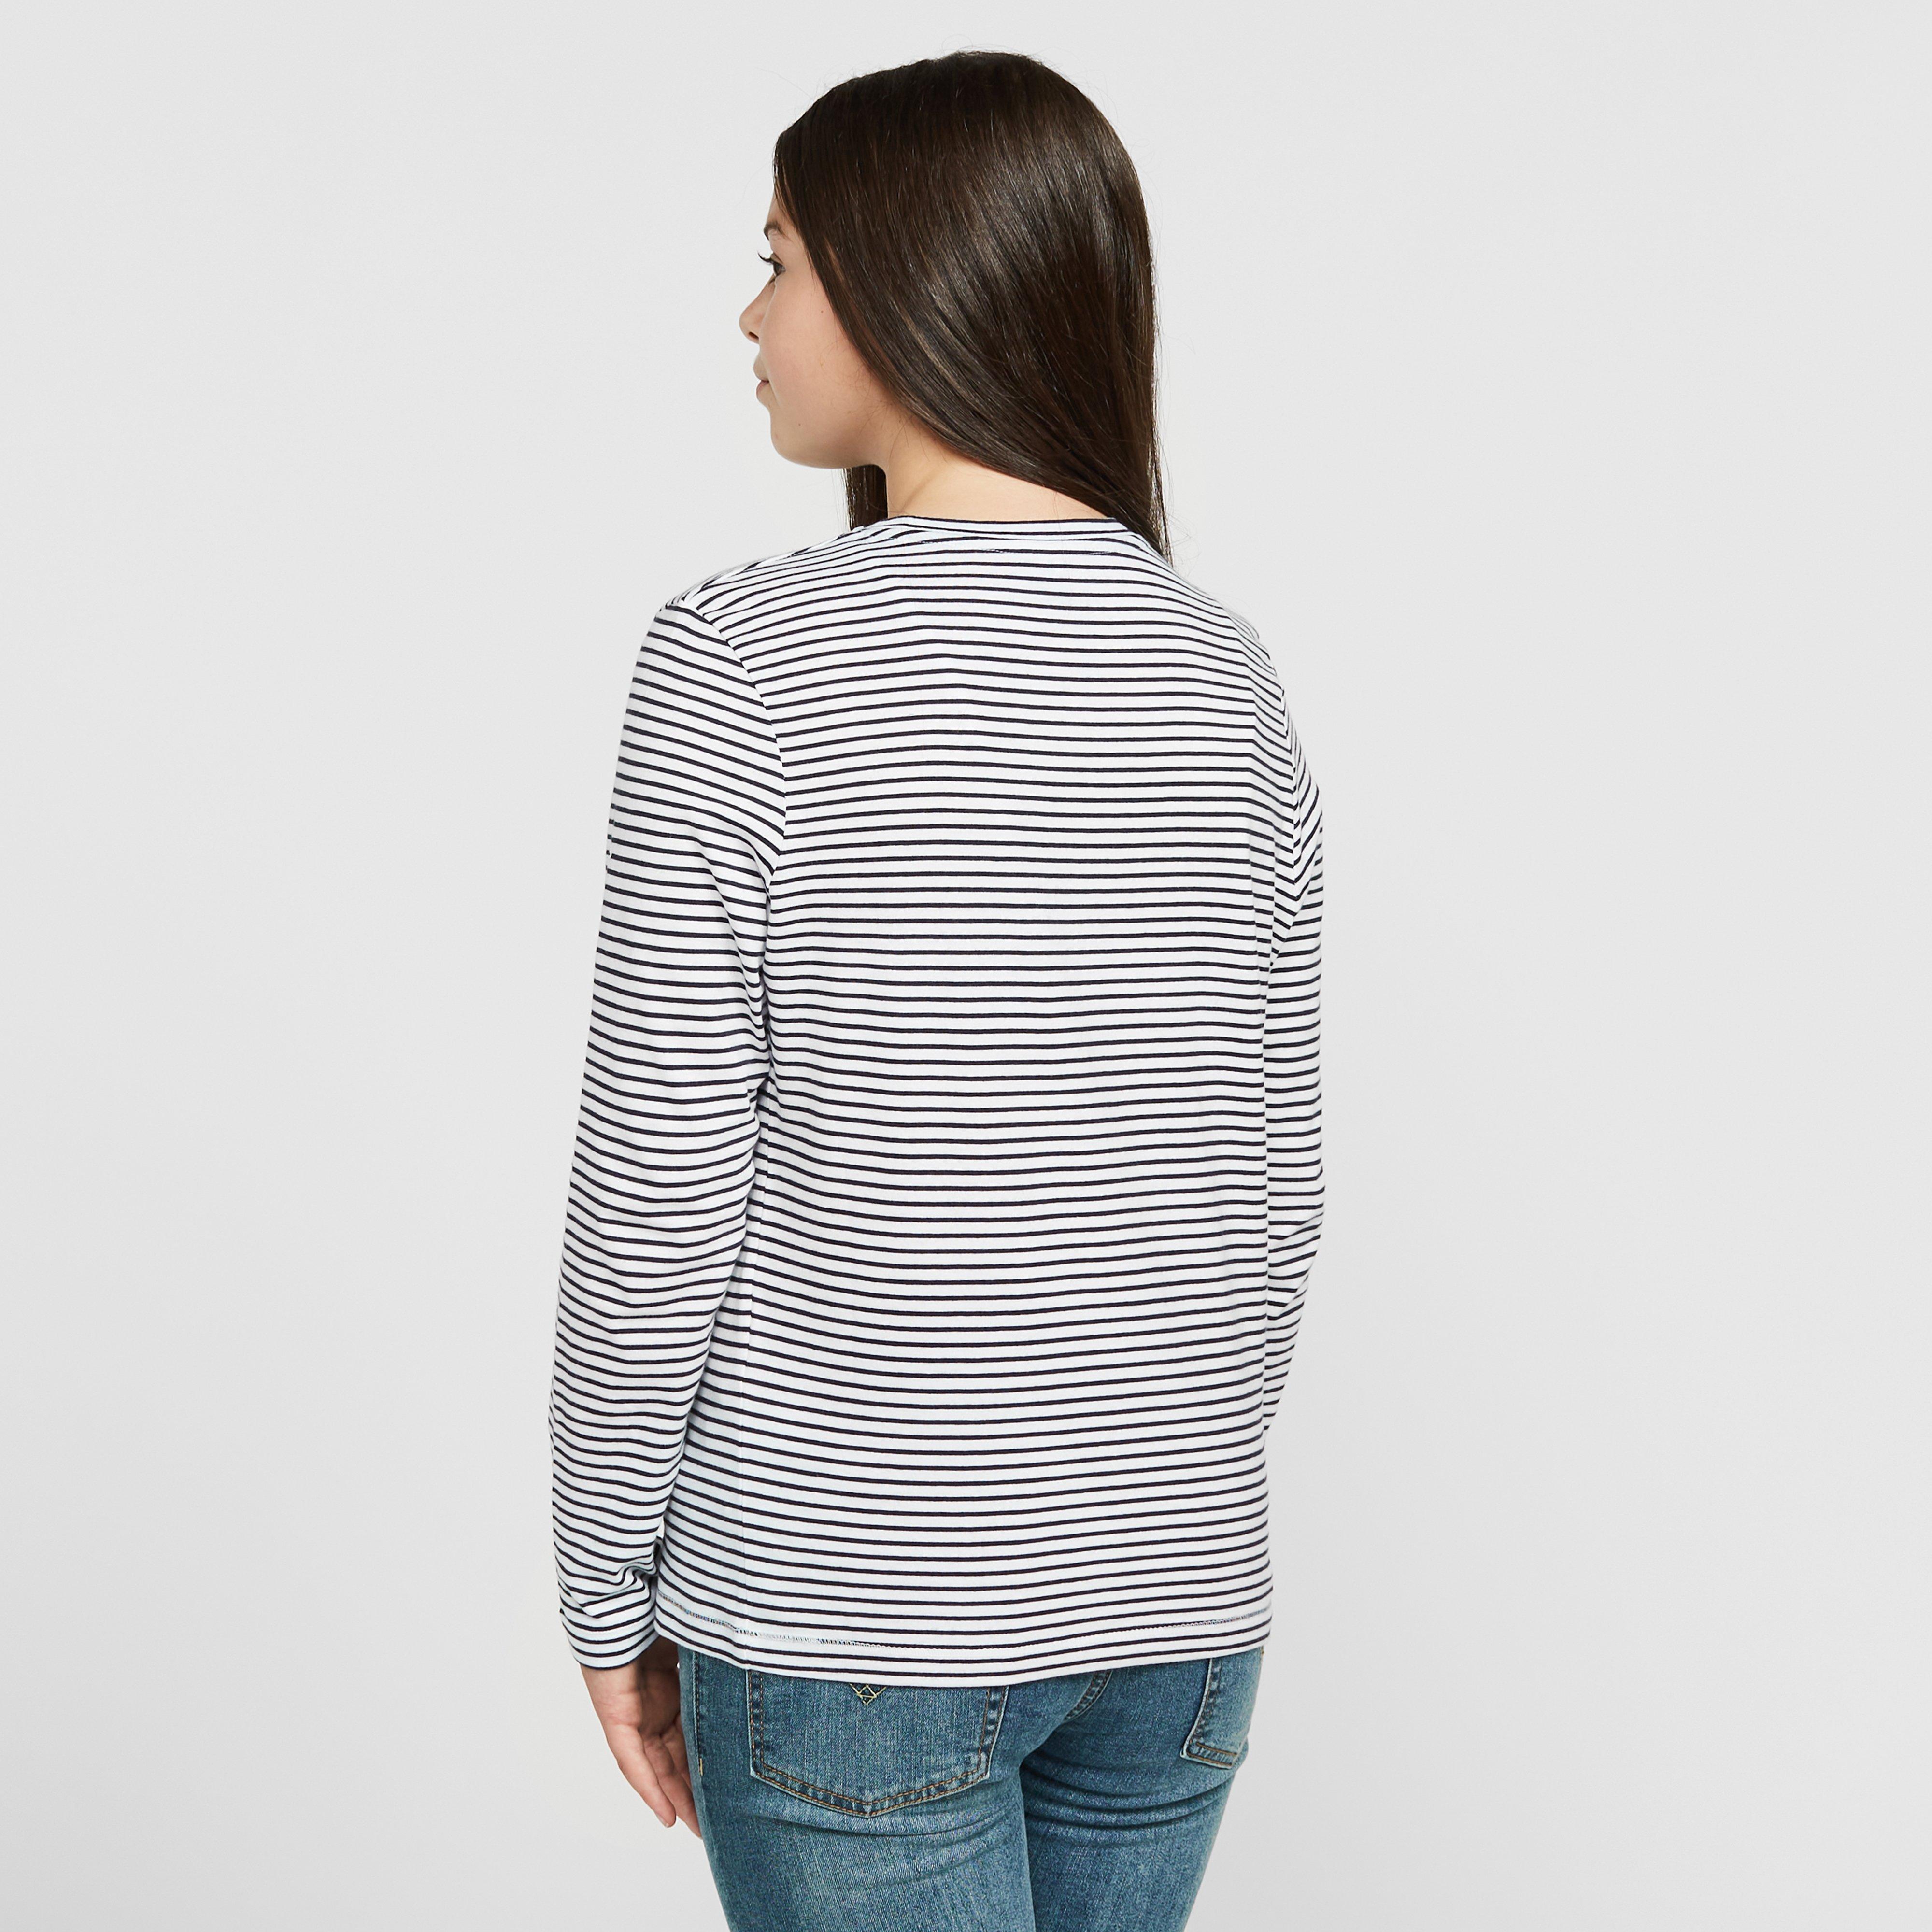 Craghoppers Nosilfie Paola Long Sleeved T-Shirt Review